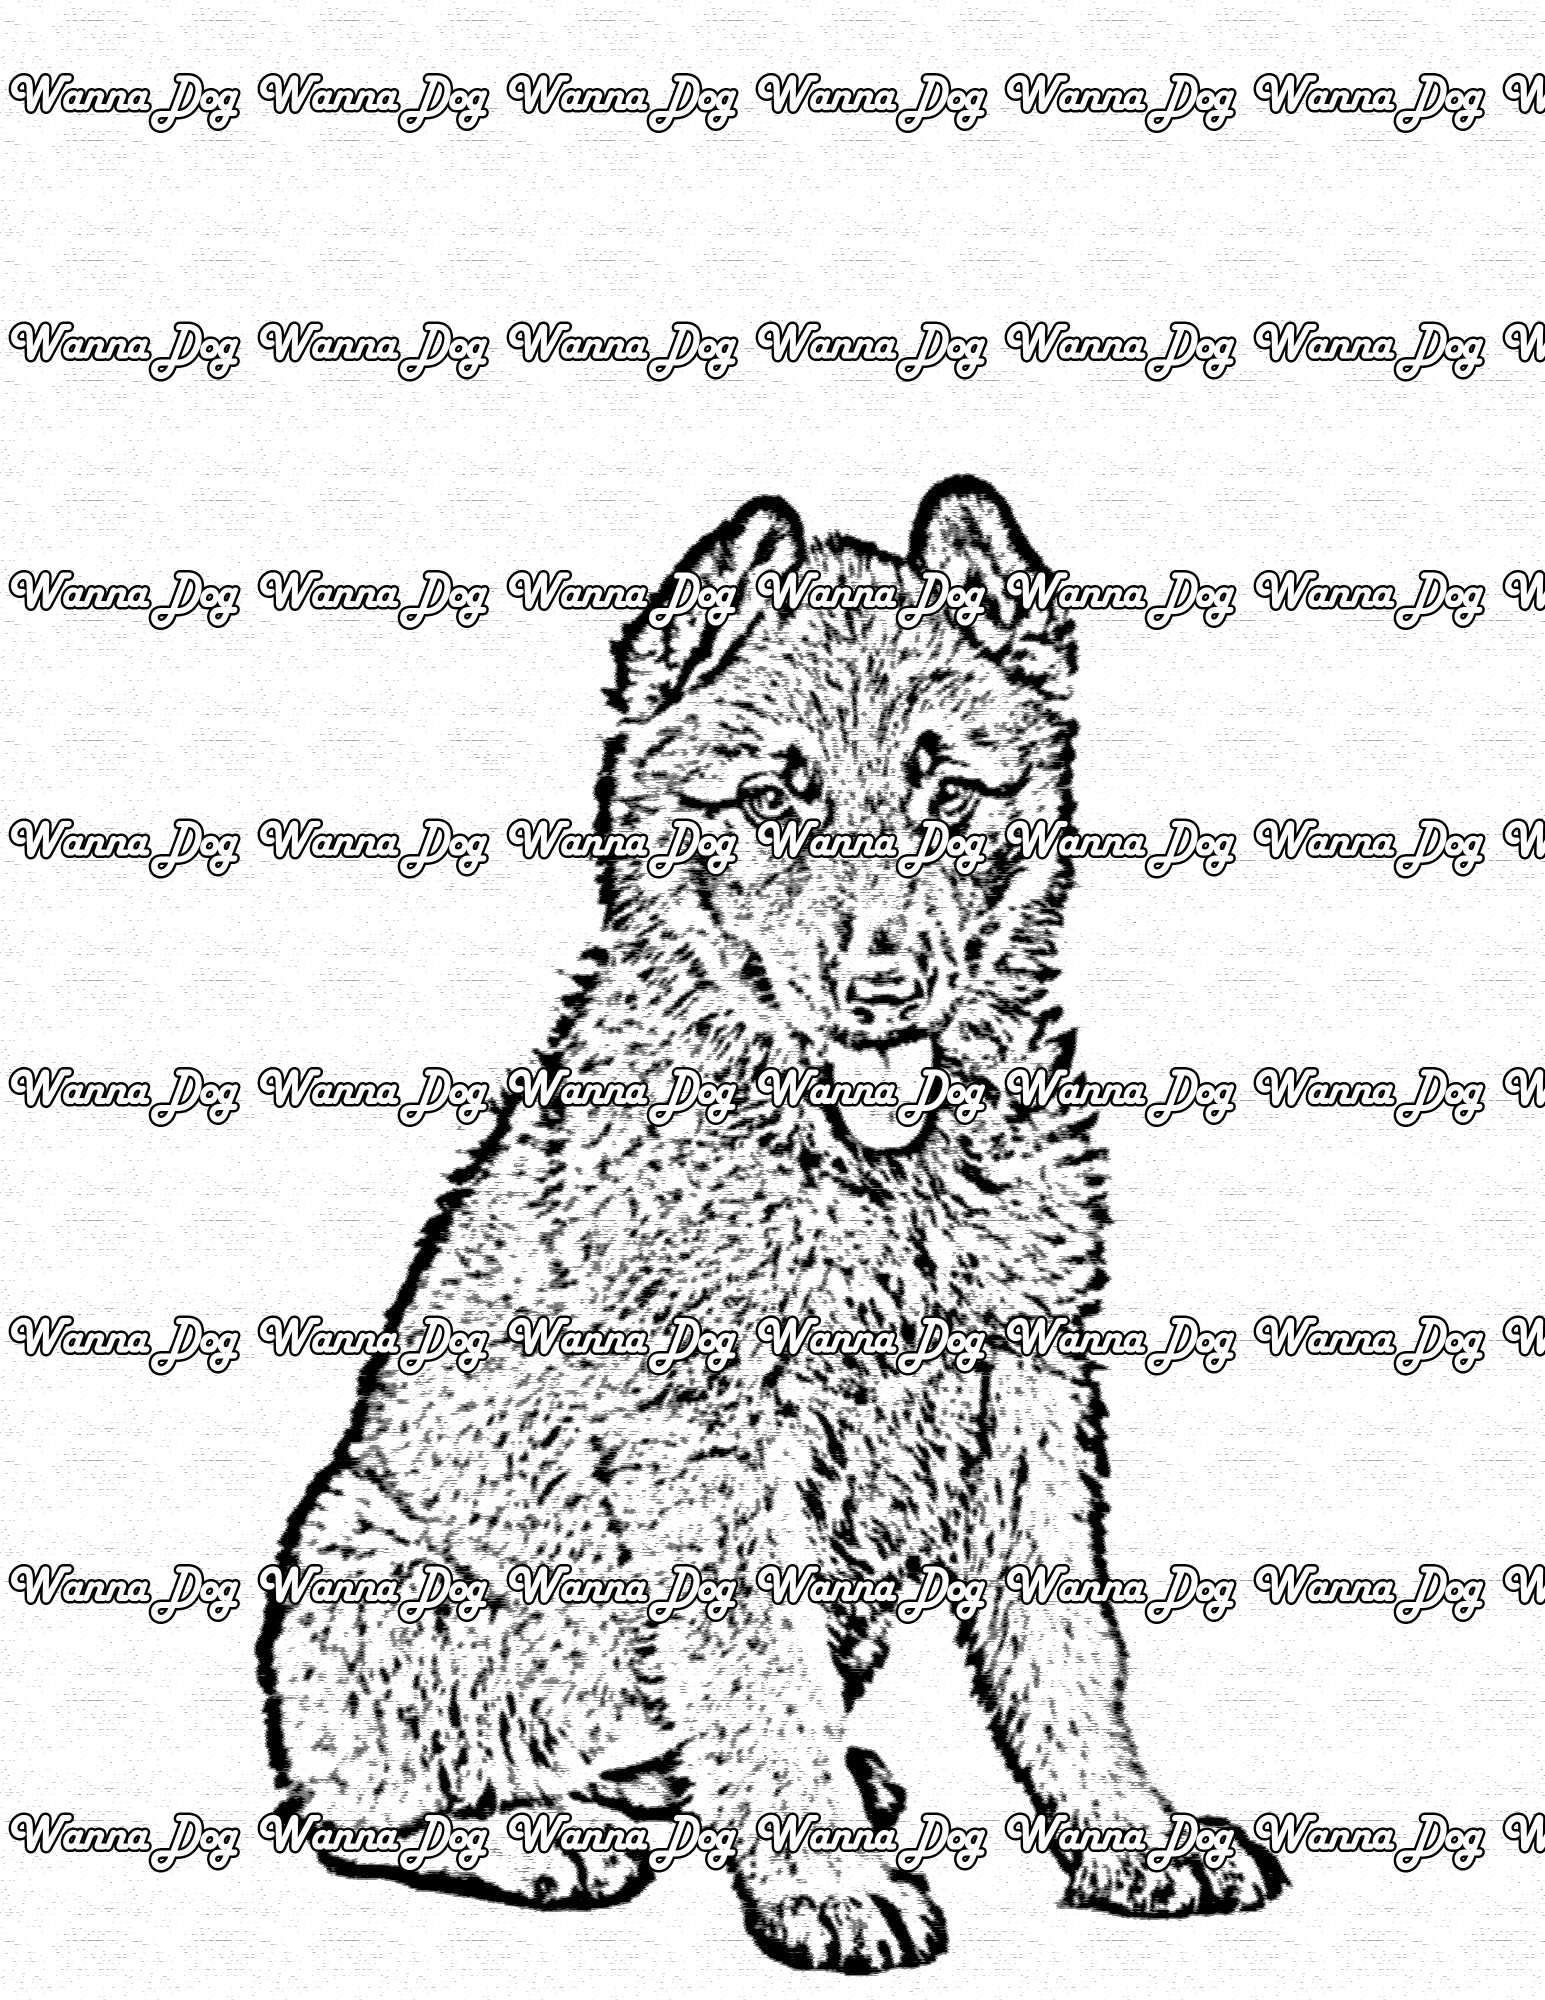 German Shepherd Puppy Coloring Pages of a German Shepherd Puppy sitting down with their tongue out